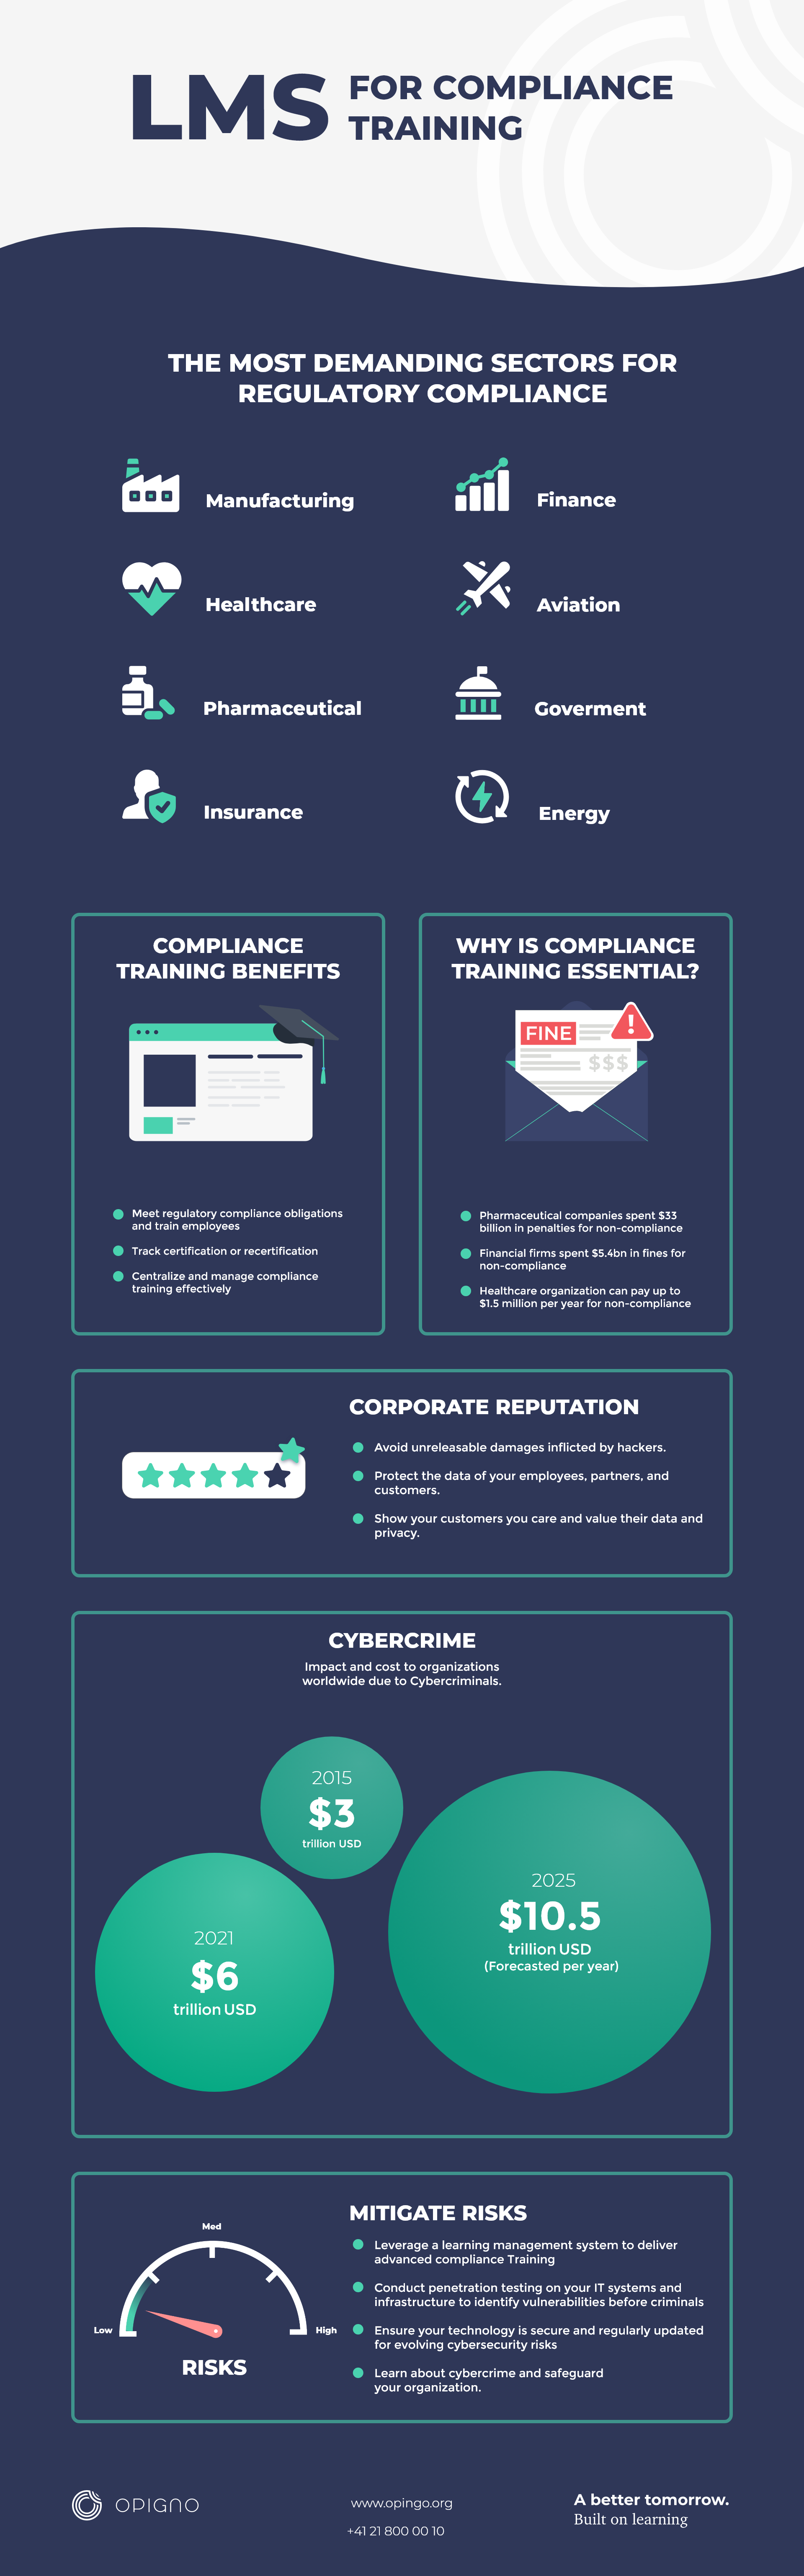 LMS Compliance training infographic 